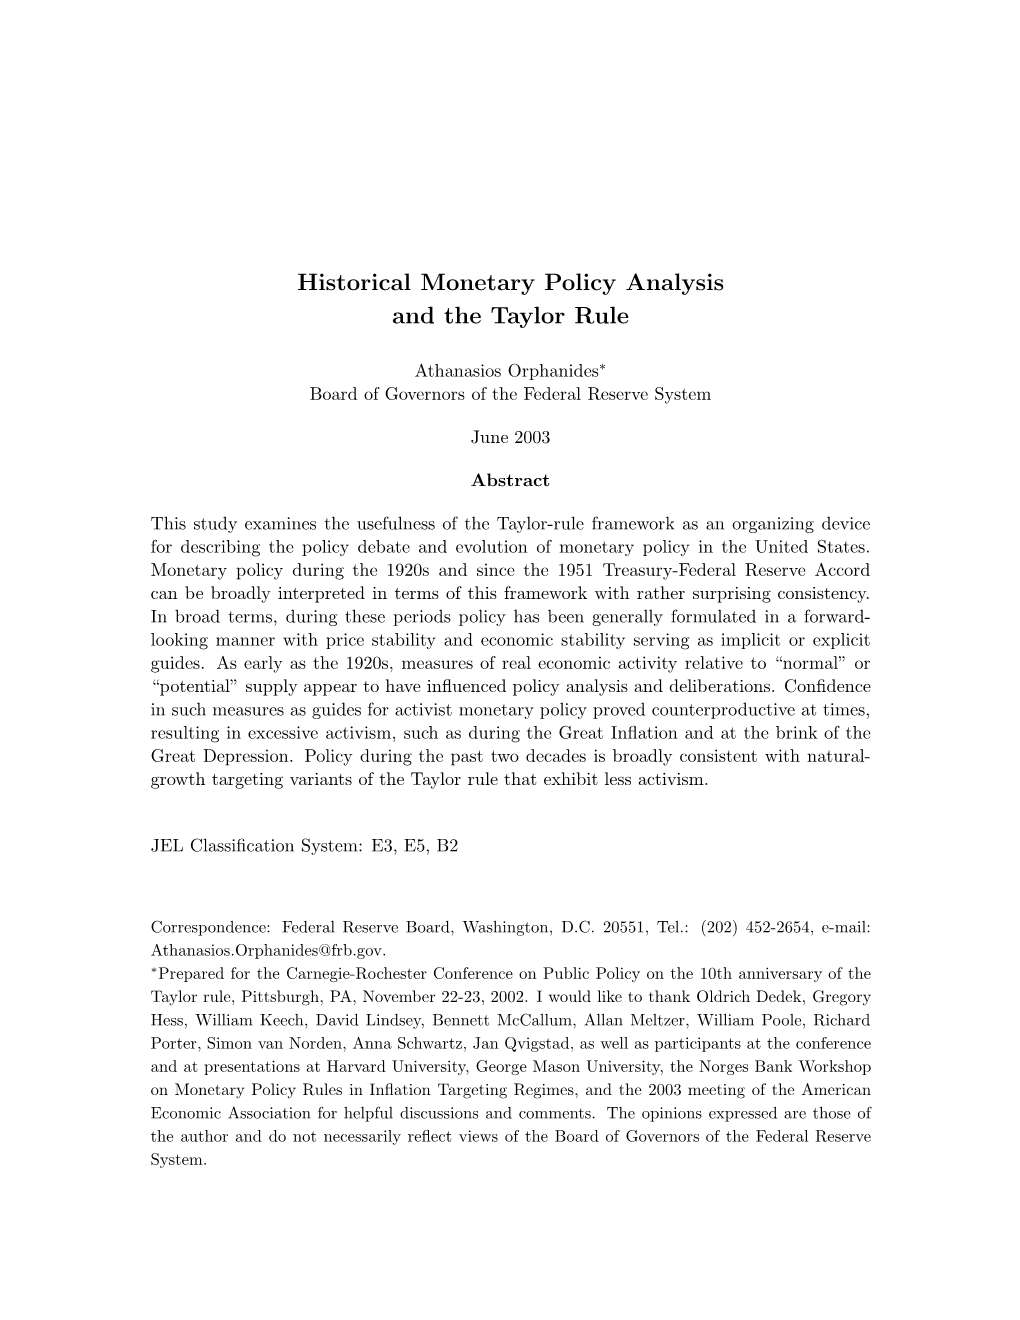 Historical Monetary Policy Analysis and the Taylor Rule